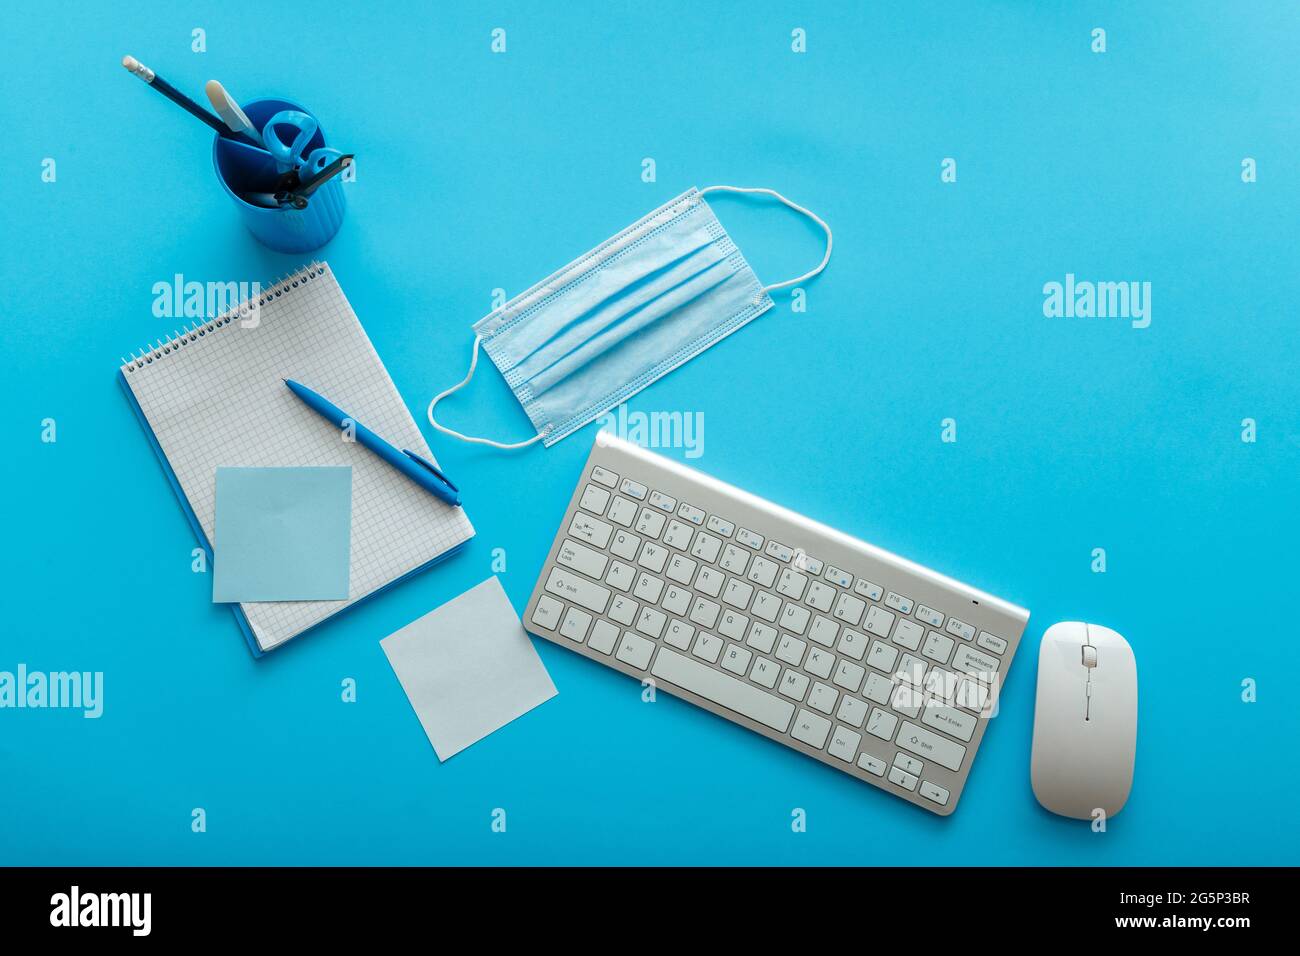 Back to school layout concept. Blue work desk with covid medical face mask, writes notes, notebook keyboard mouse at workplace. Desktop office space Stock Photo